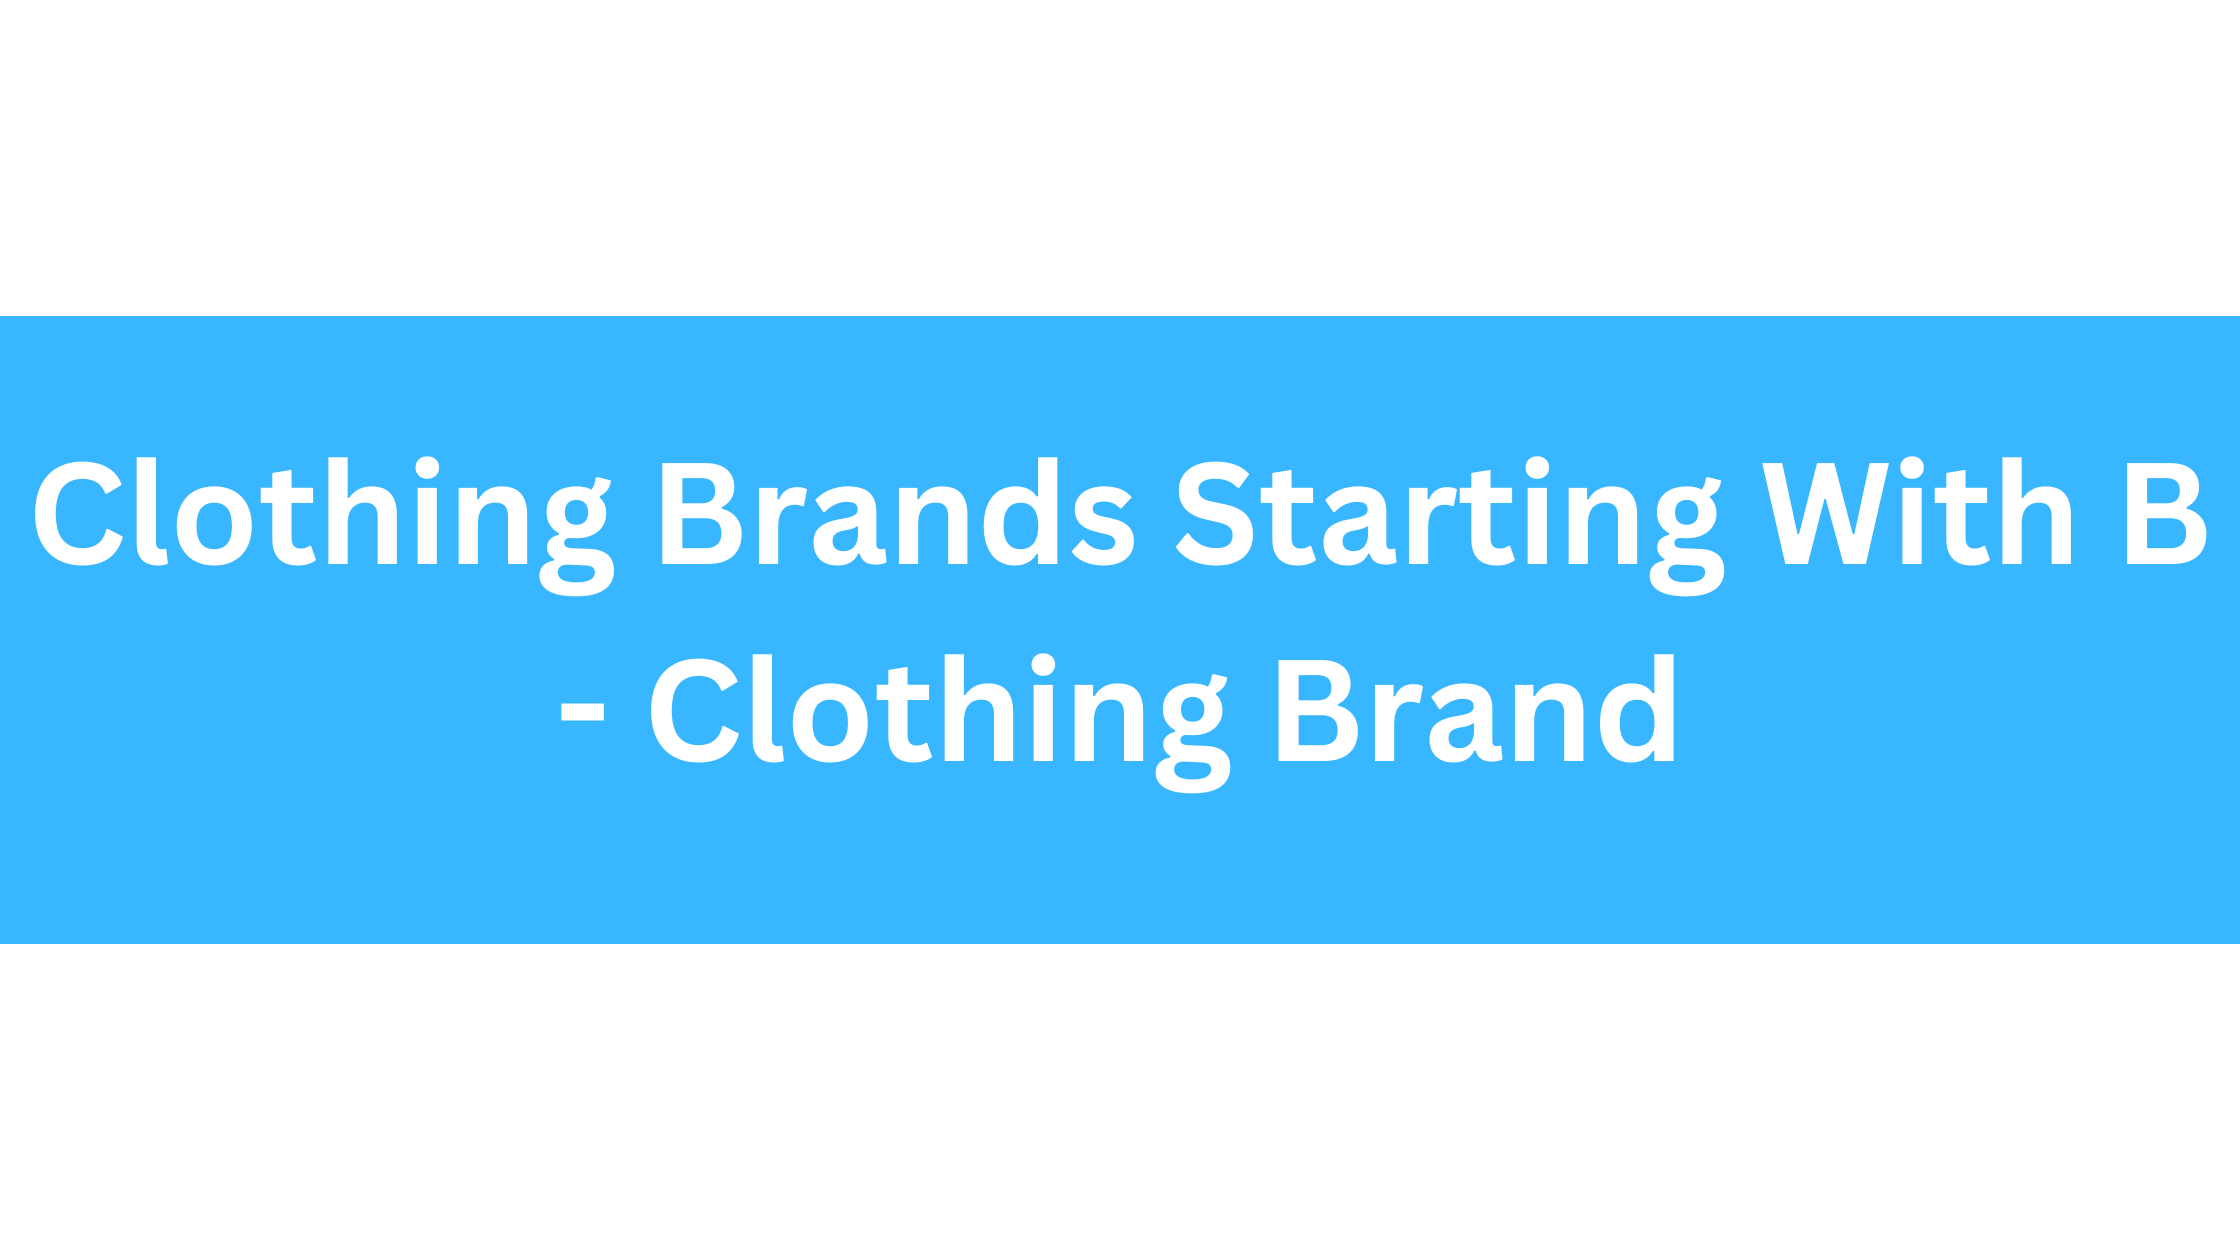 Clothing Brands Starting With B